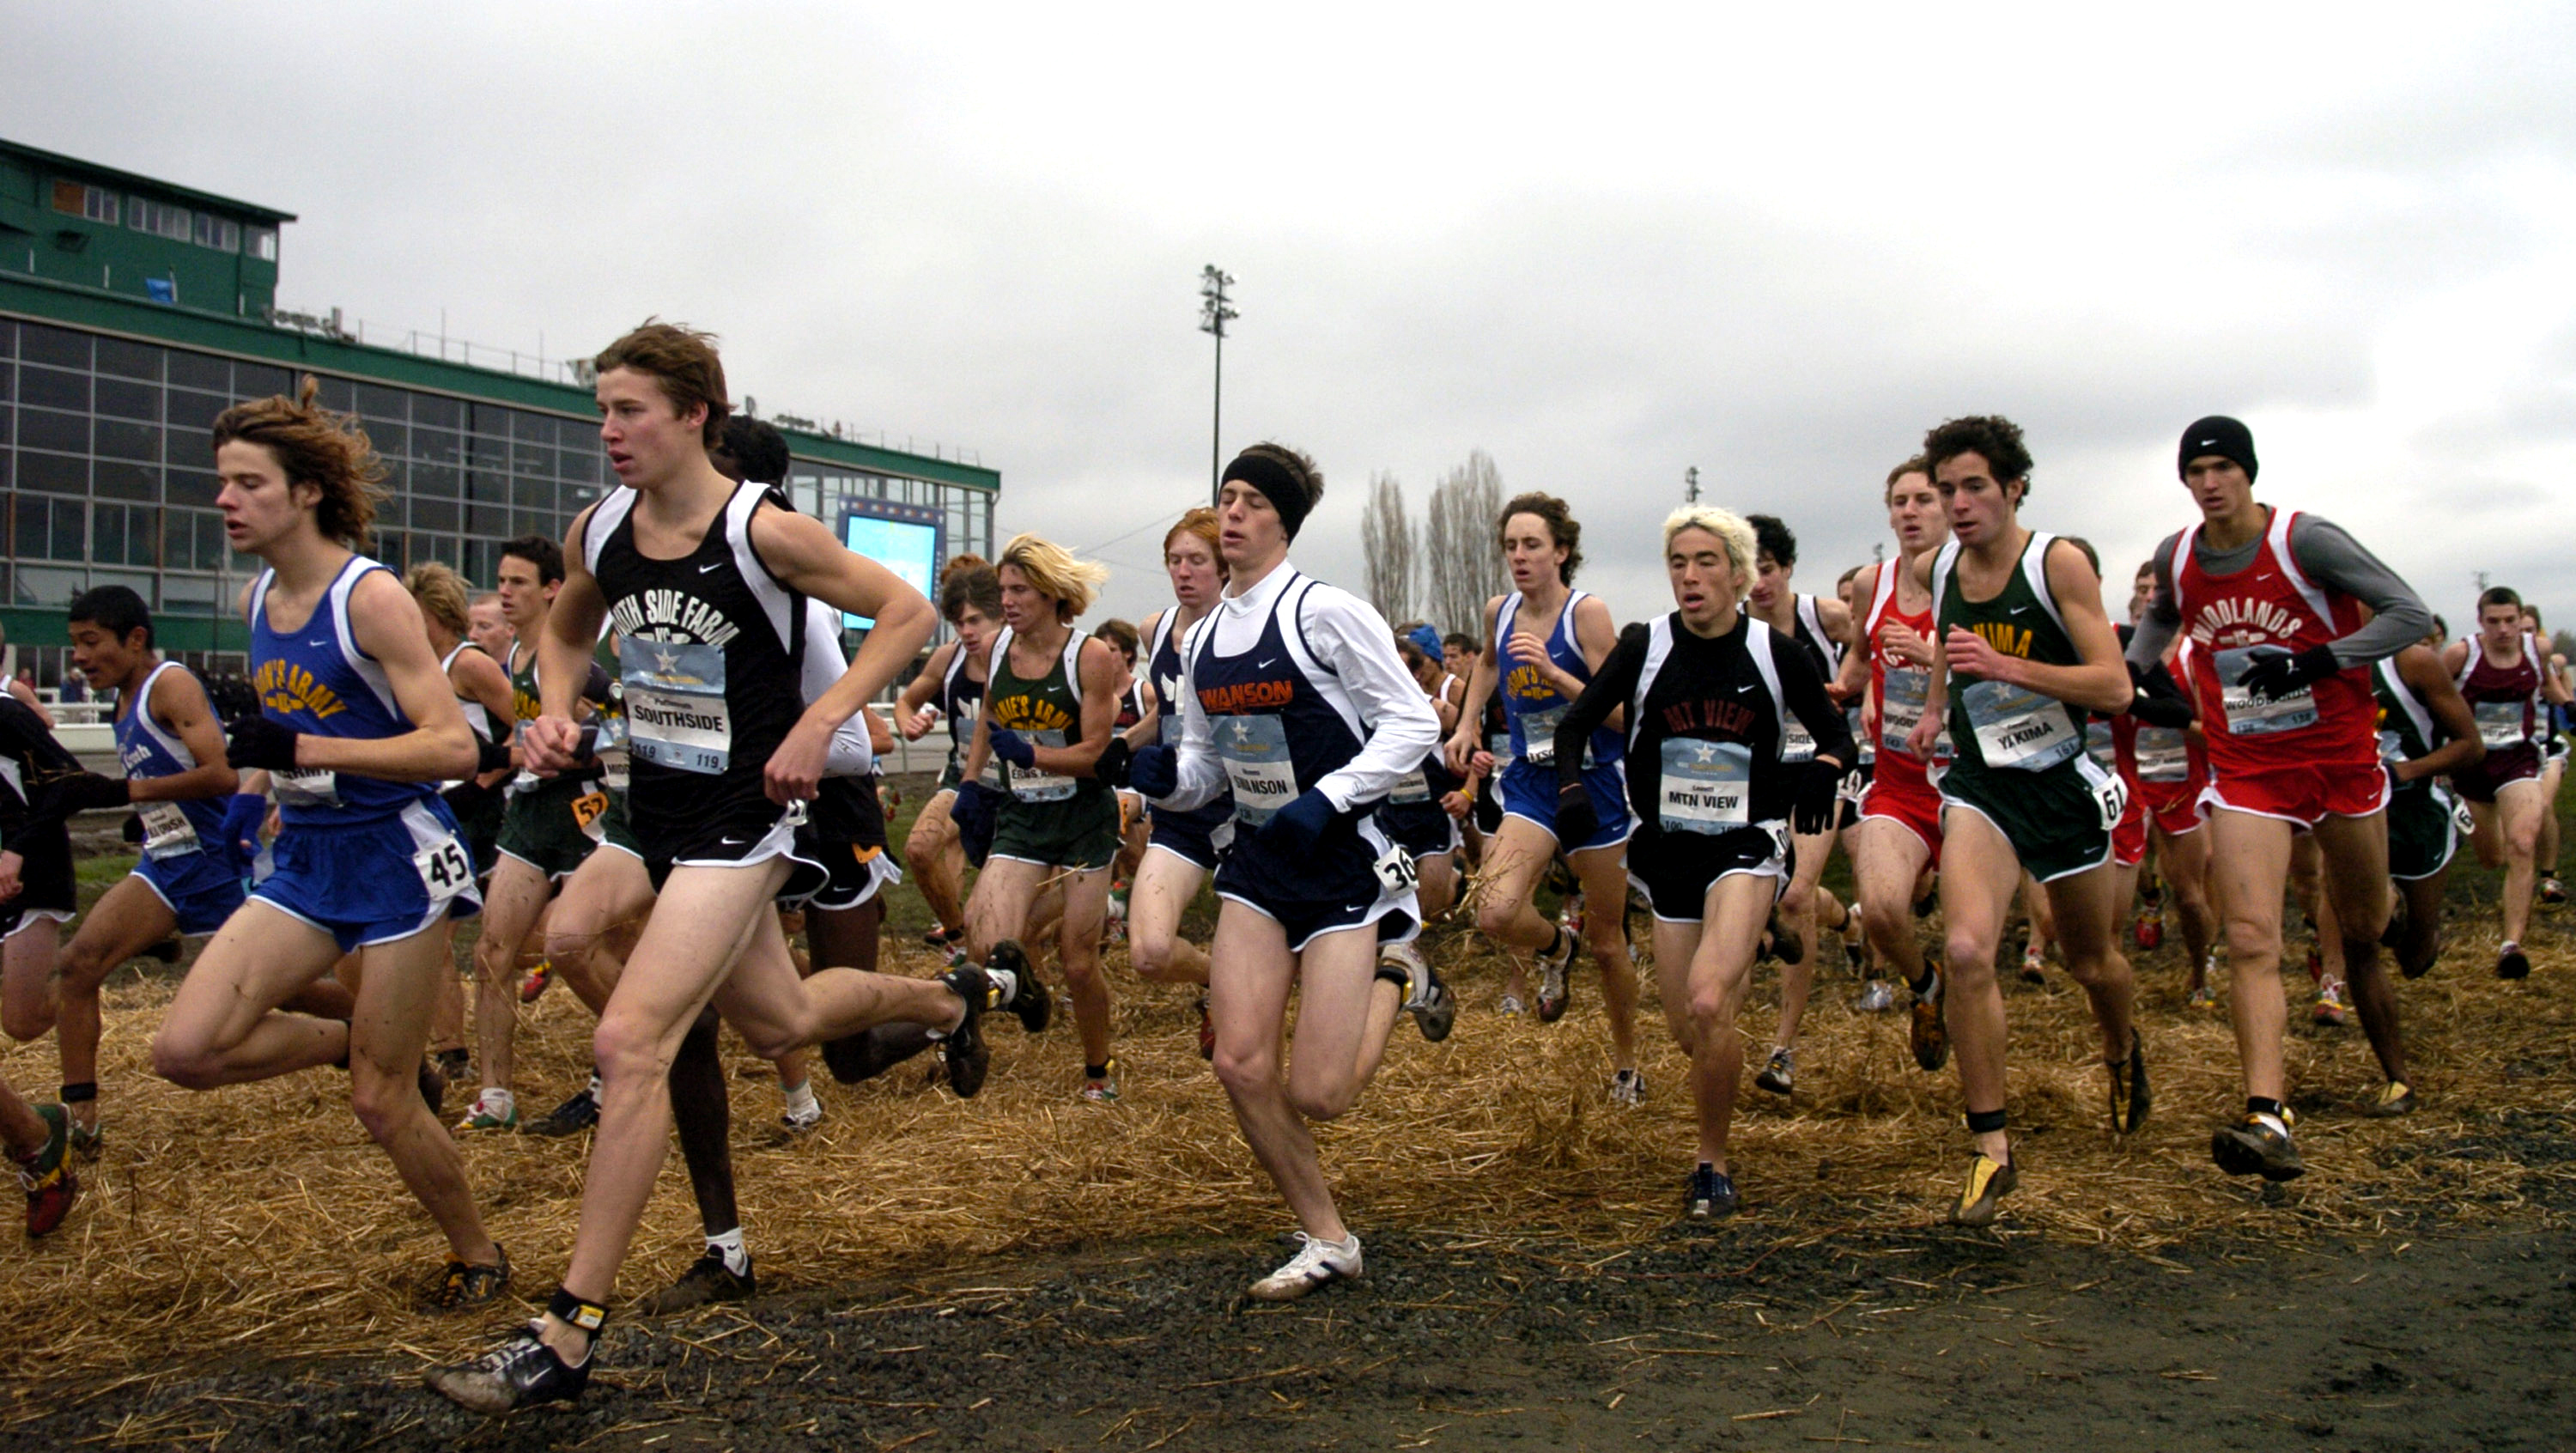 Runners in the boys race of the Nike Team National Cross Country championships pass in front of the Portland Meadows Race Track Grandstand in Portland, Ore. on Saturday, Dec. 4, 2004.